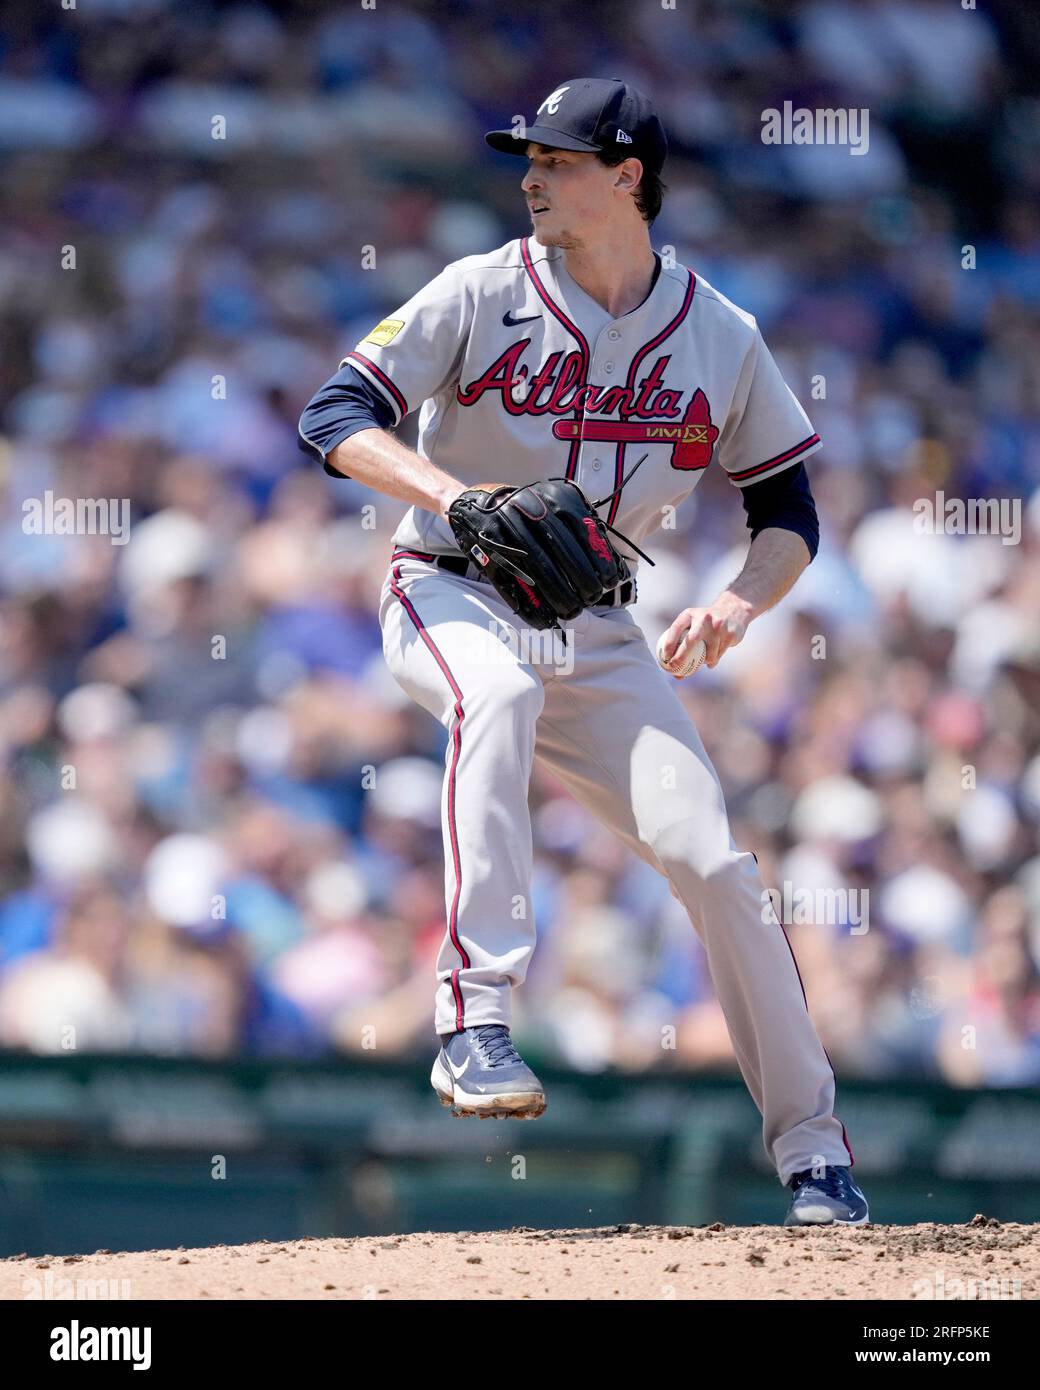 Atlanta Braves starting pitcher Max Fried winds up during a